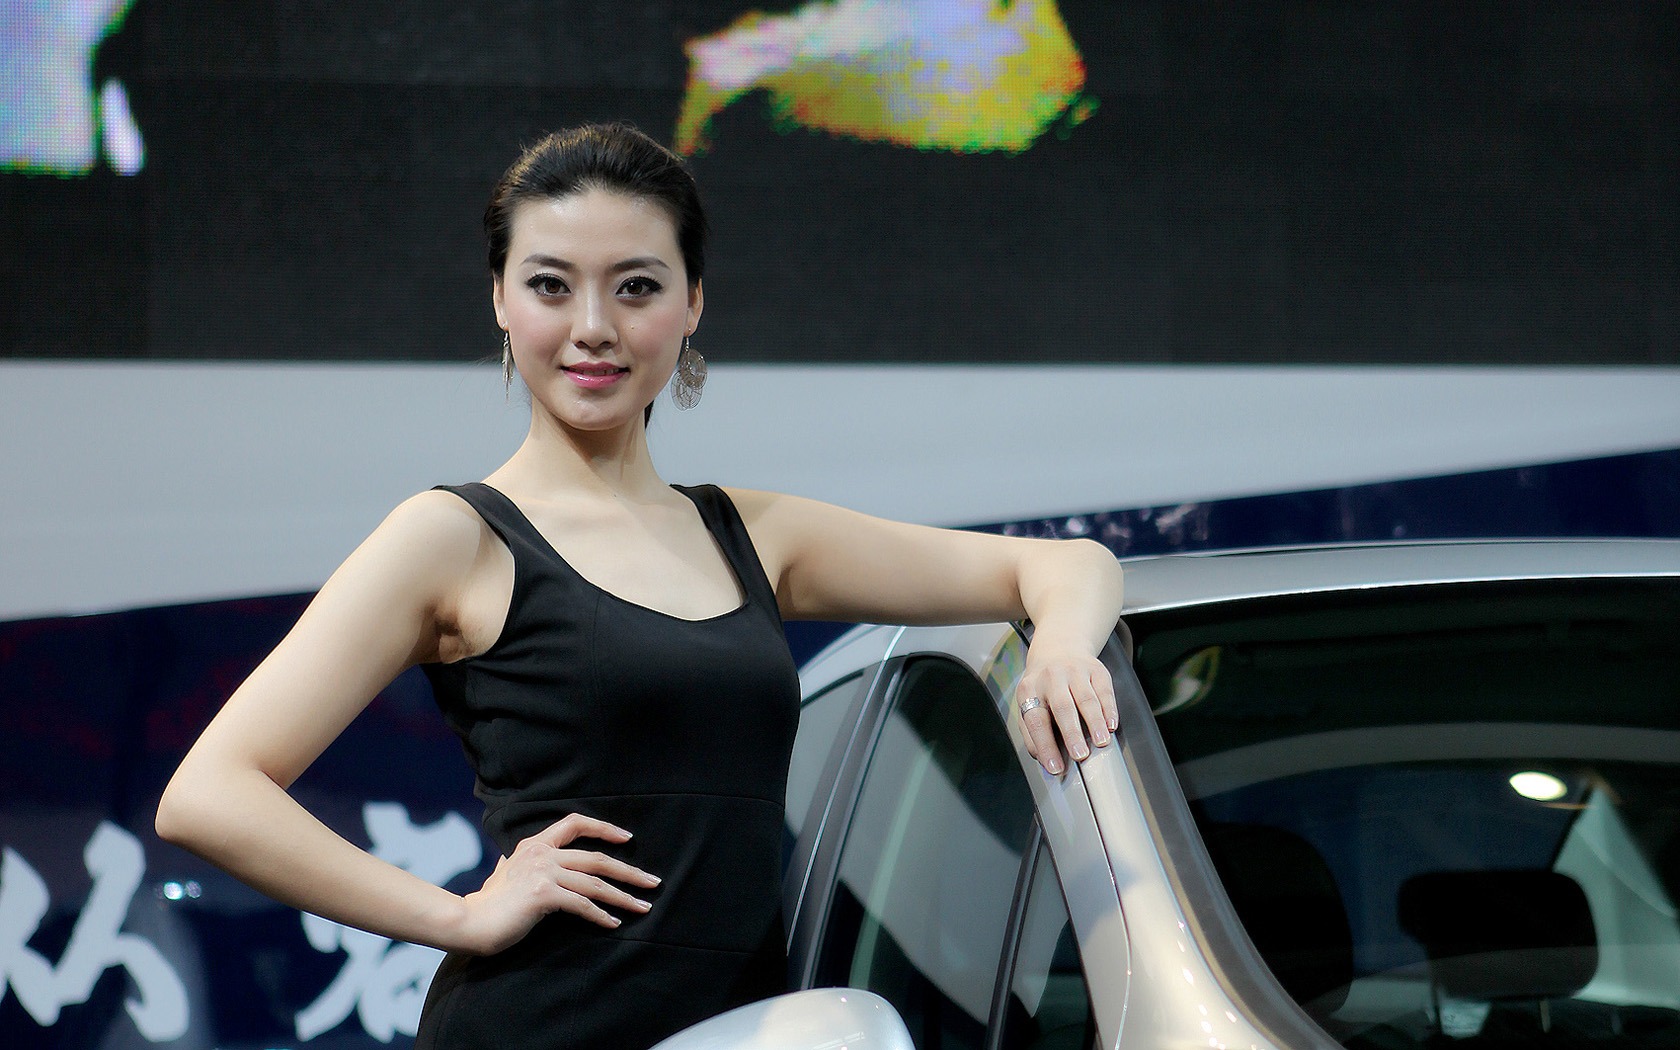 2010 Beijing Auto Show car models Collection (2) #10 - 1680x1050